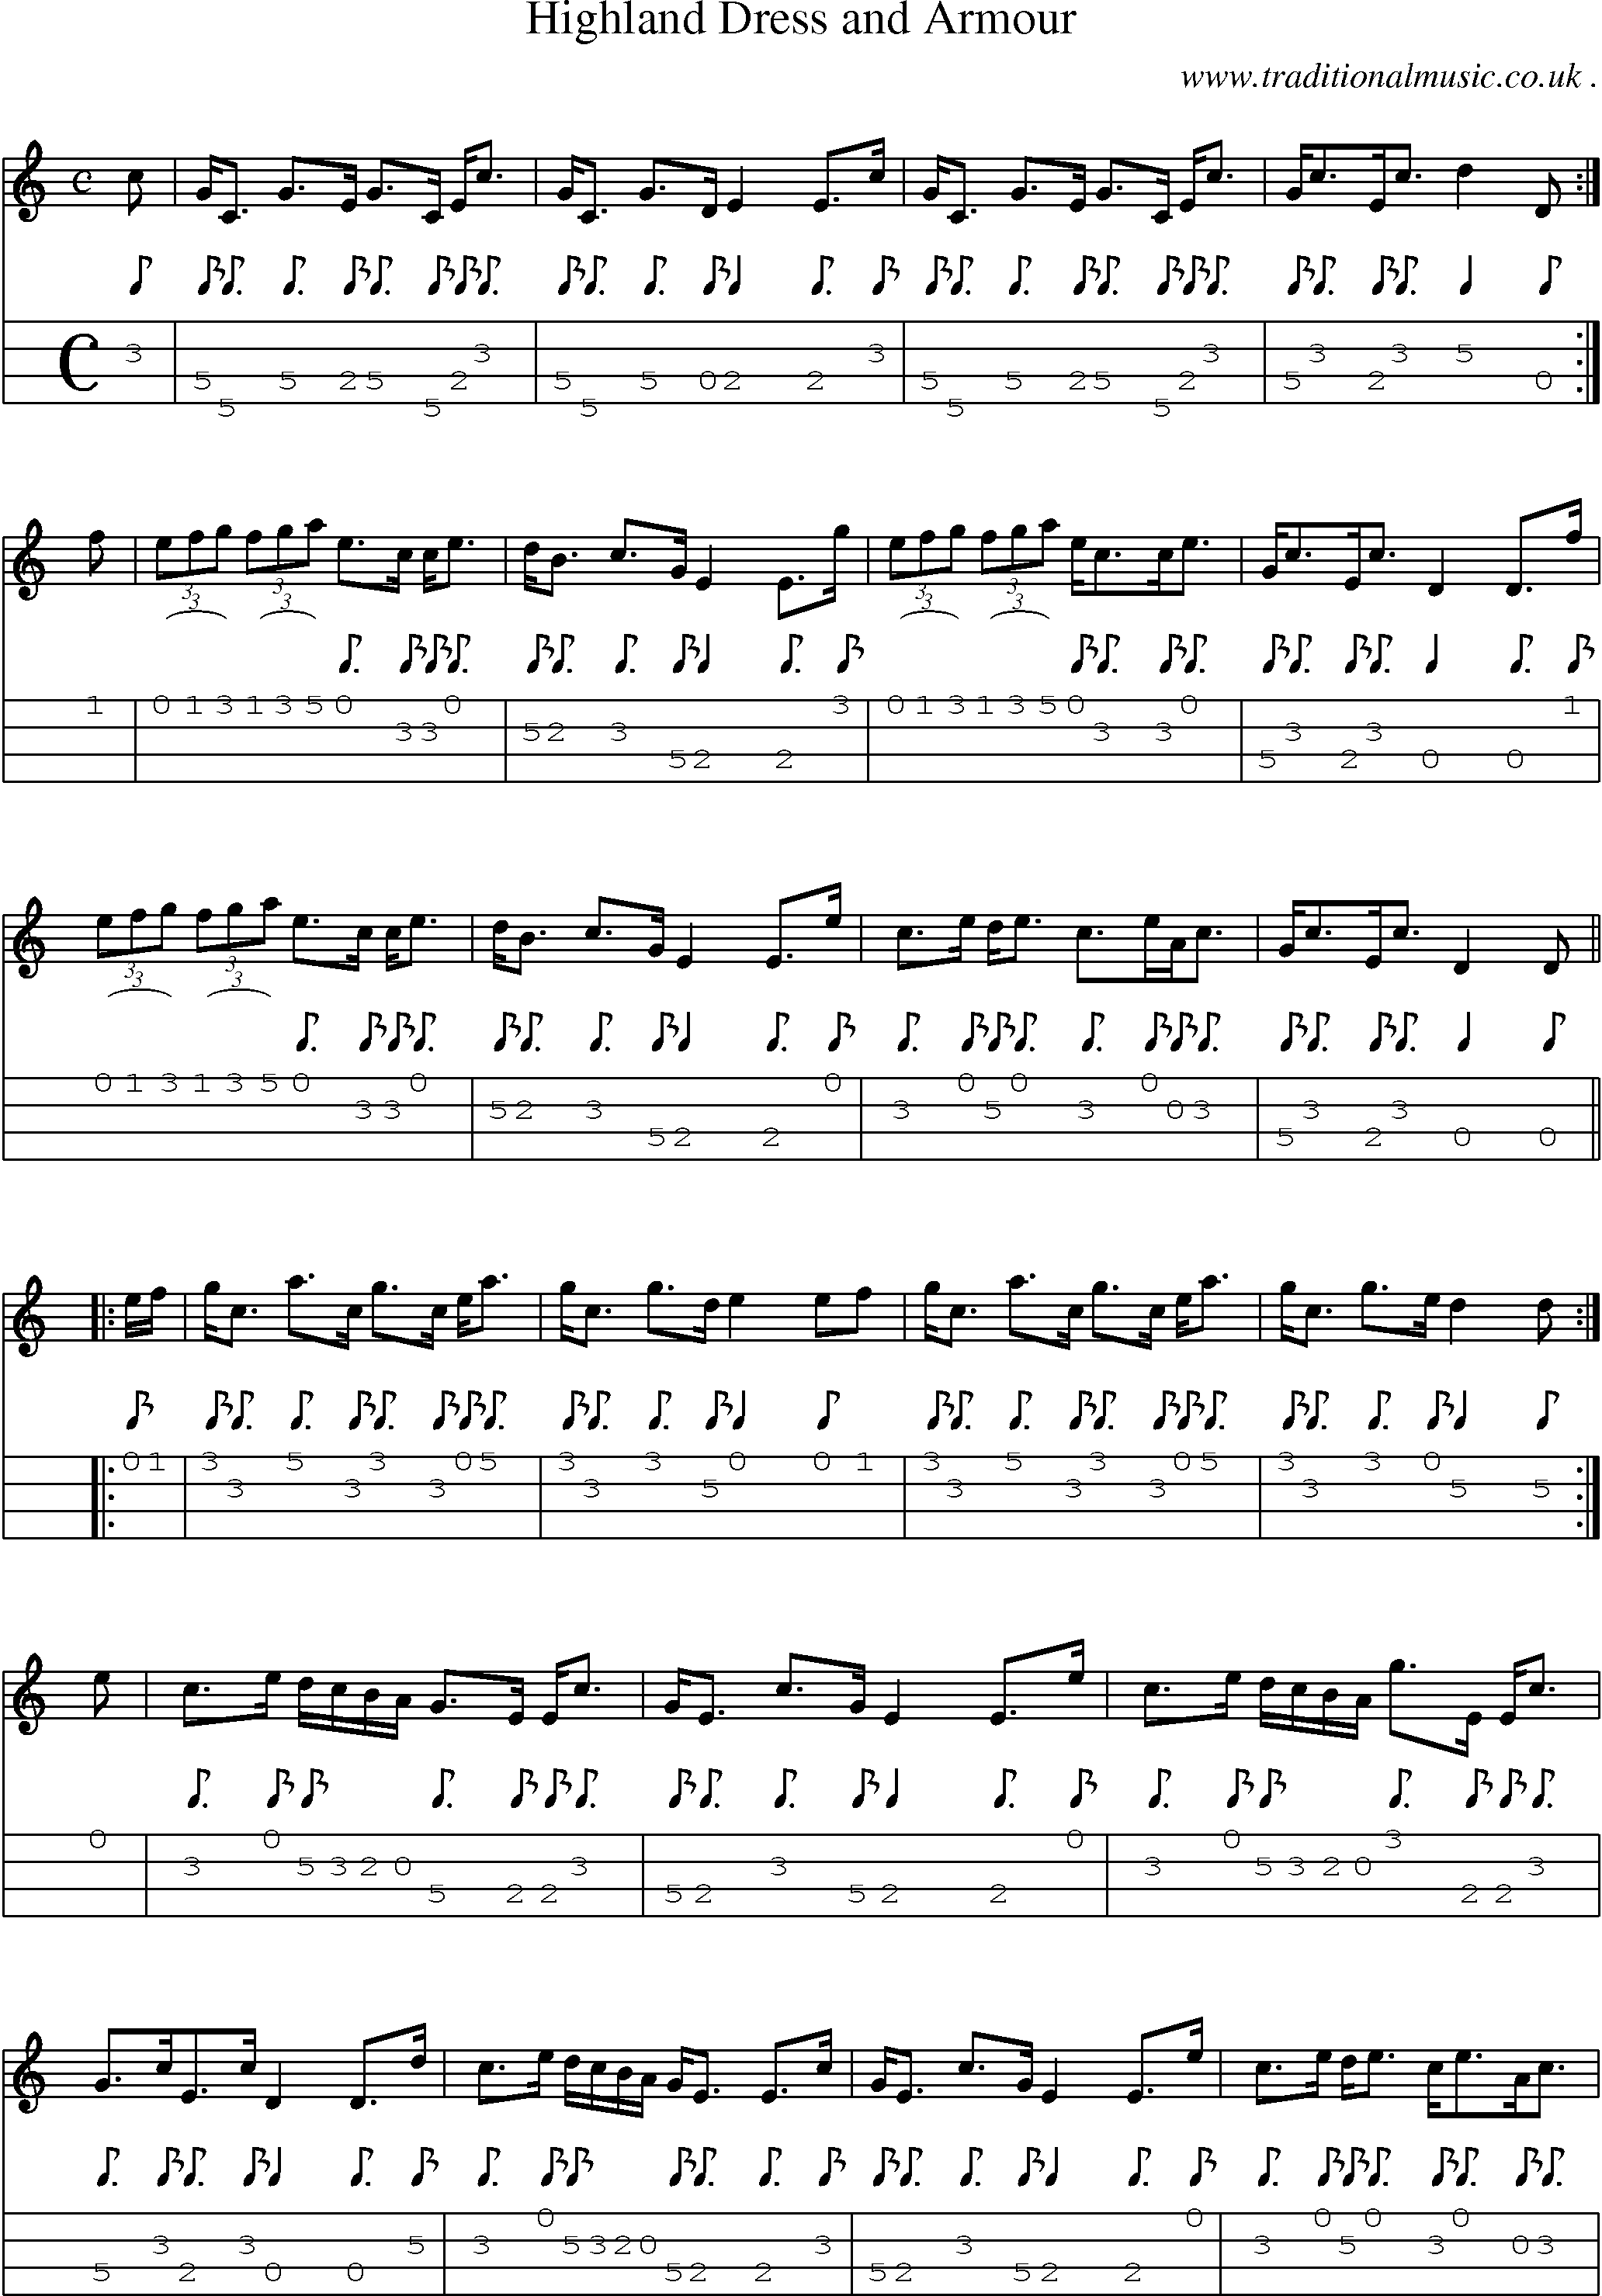 Sheet-music  score, Chords and Mandolin Tabs for Highland Dress And Armour